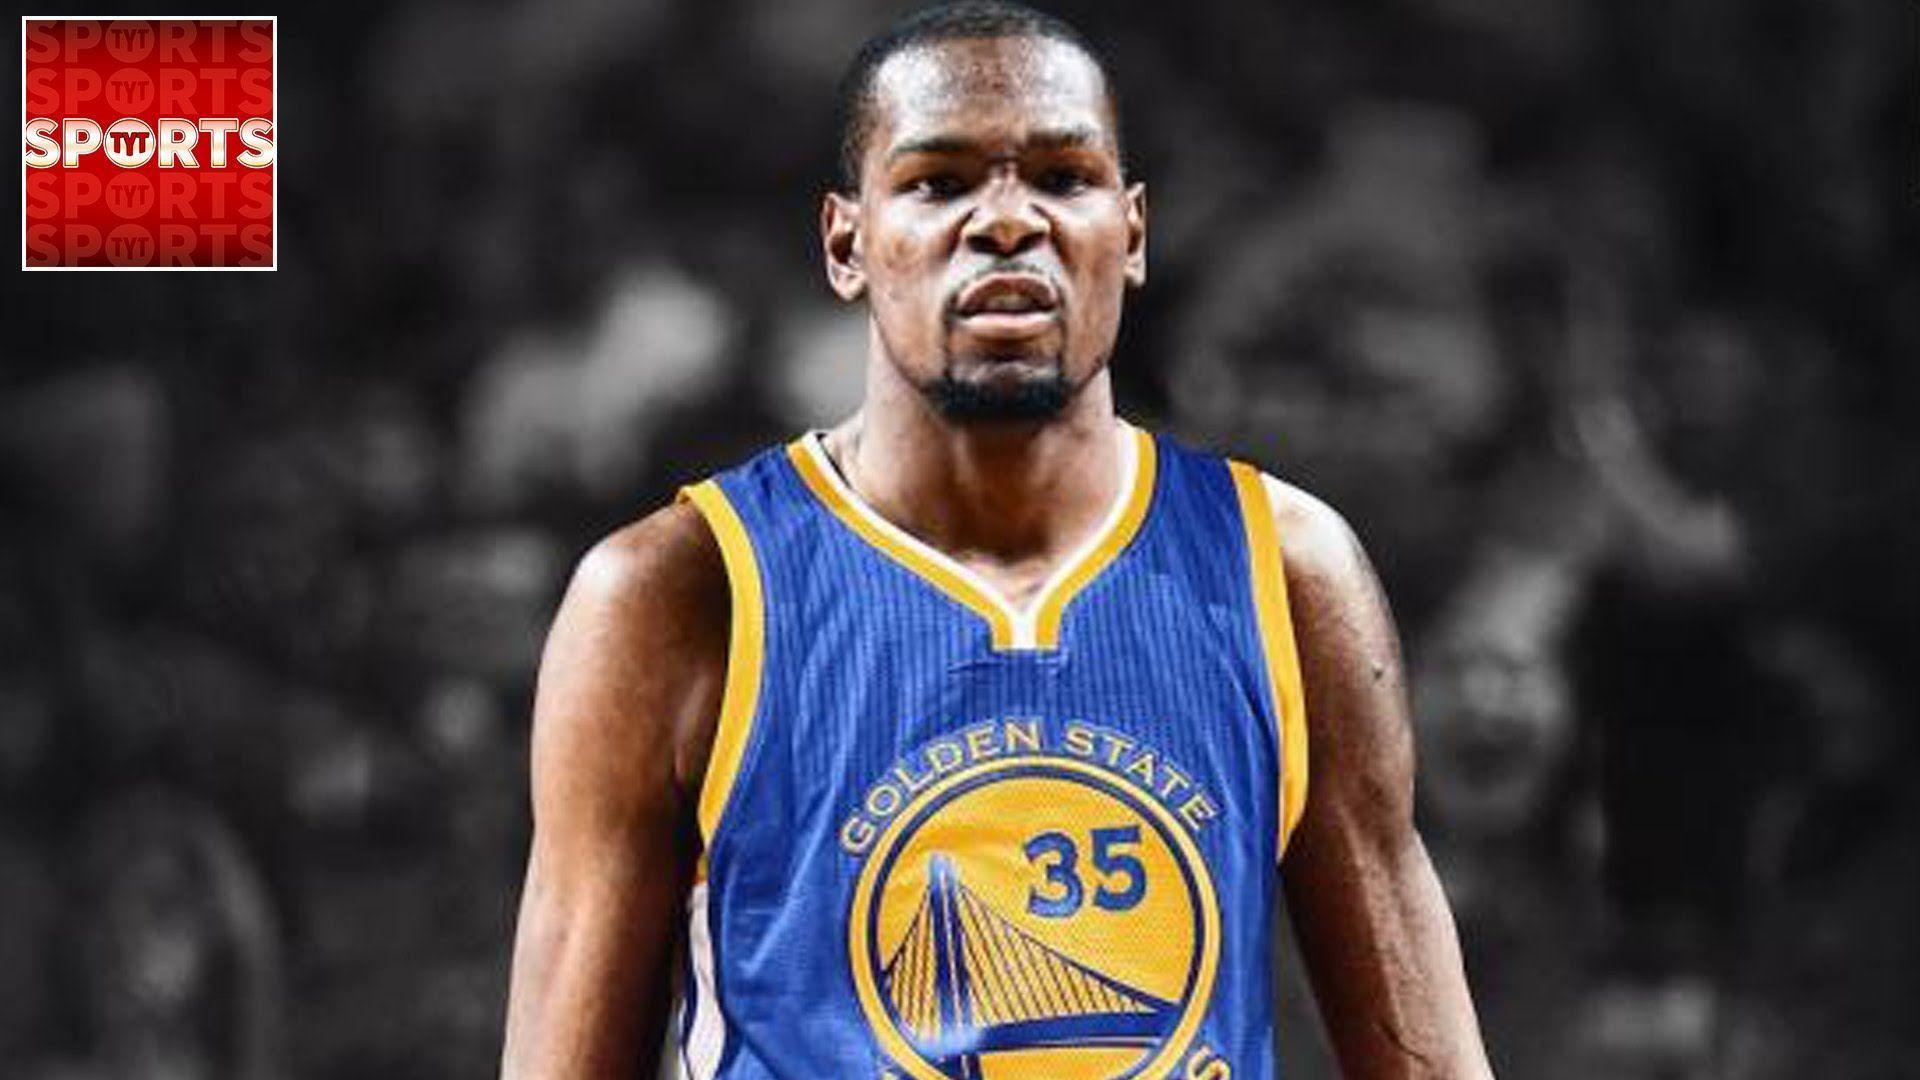 KEVIN DURANT SIGNS WITH THE WARRIORS